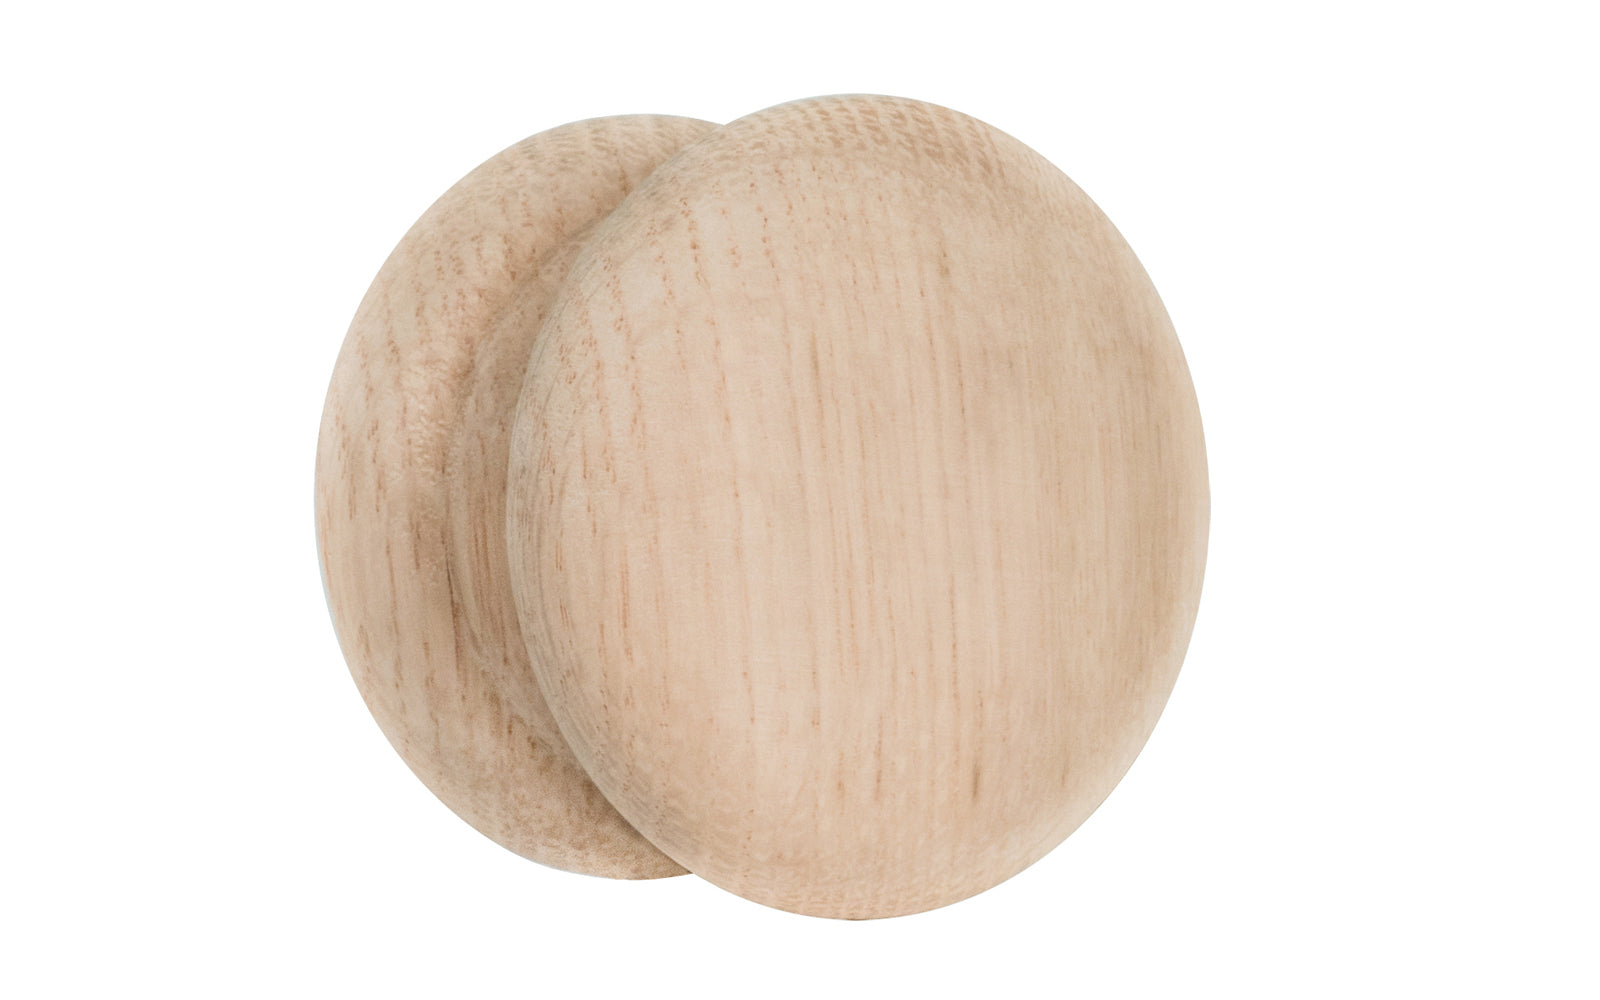 A large & classic oak wood round cabinet knob with a large pedestal shaped base. Made of unfinished oak wood. These knobs may be stained, painted, or varnished if desired. Large Oak Wood Cabinet Knob with Large Base. 2-1/2" diameter knob.